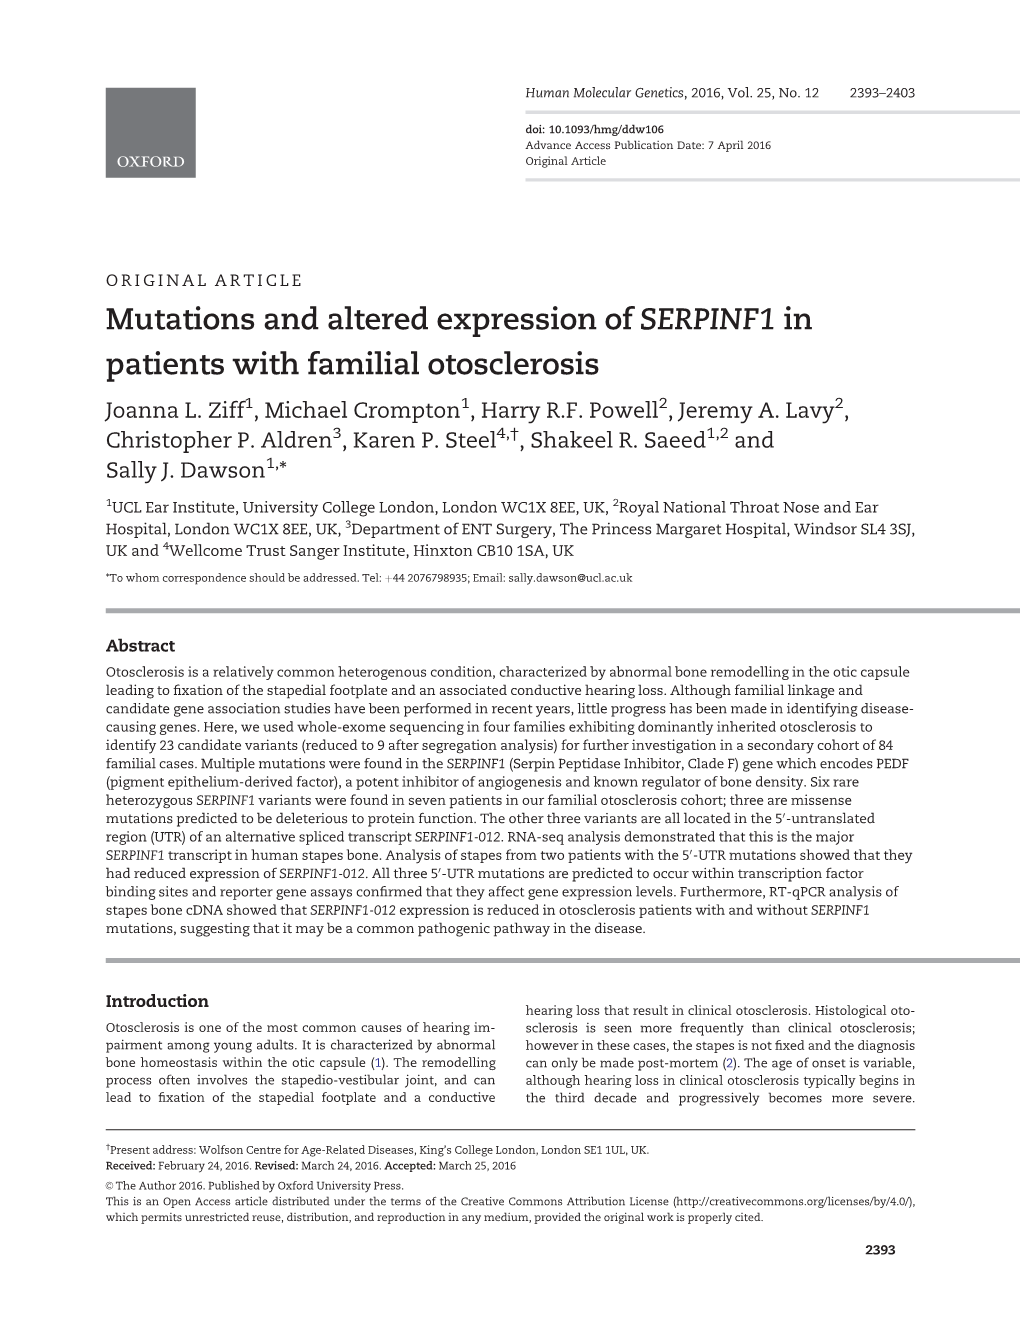 Mutations and Altered Expression of SERPINF1 in Patients with Familial Otosclerosis Joanna L